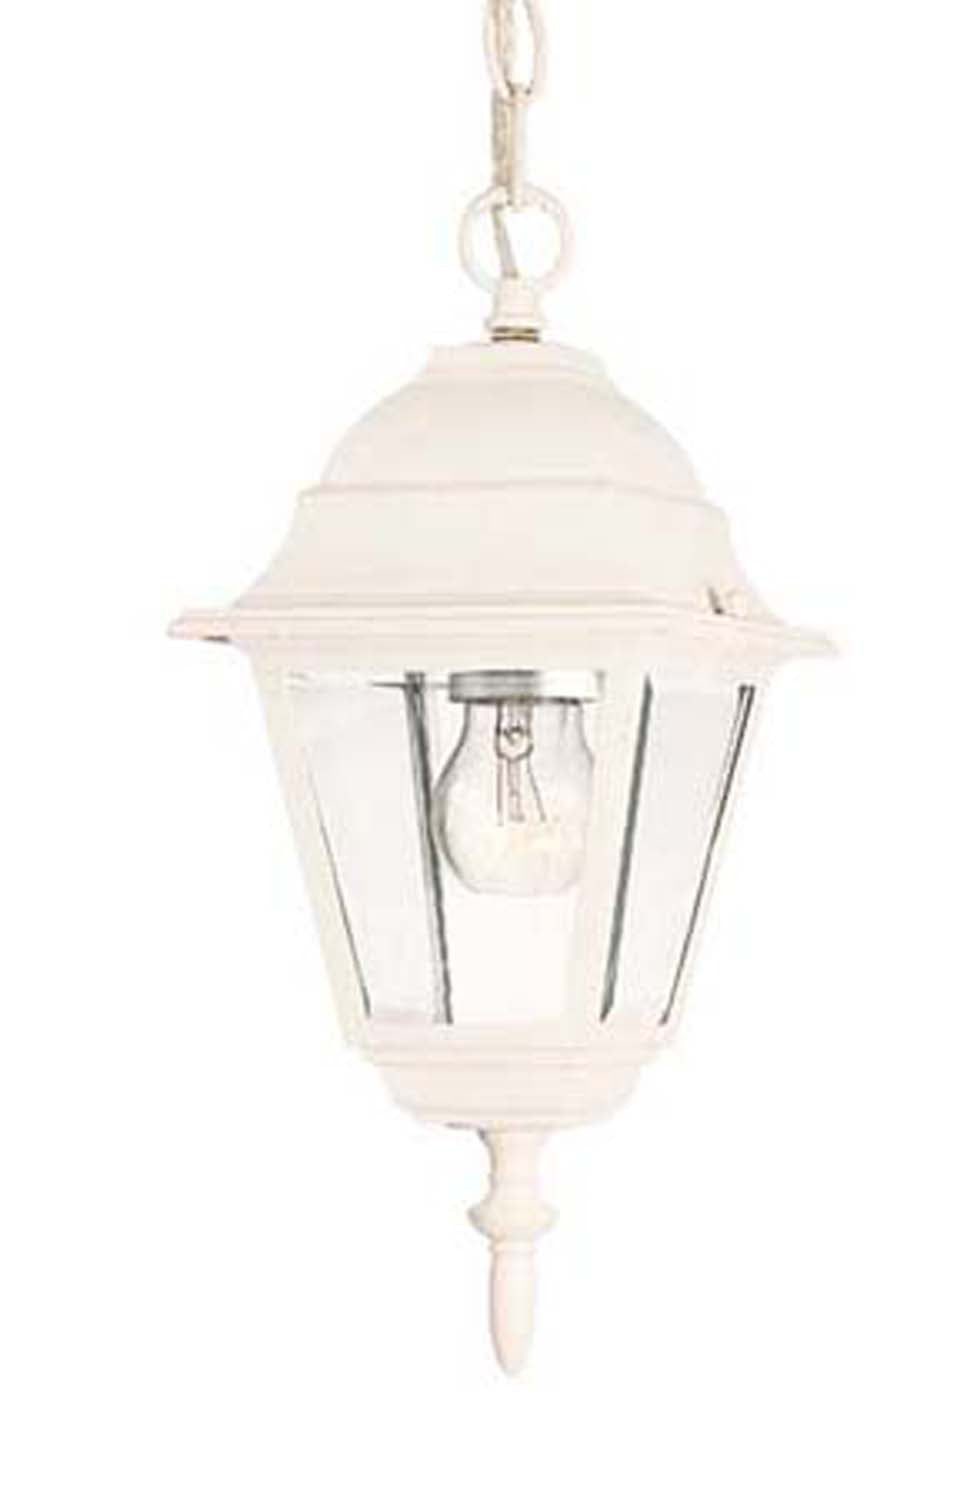 Builders` Choice One Light Hanging Lantern by Acclaim Lighting in Textured White Finish (4006TW)